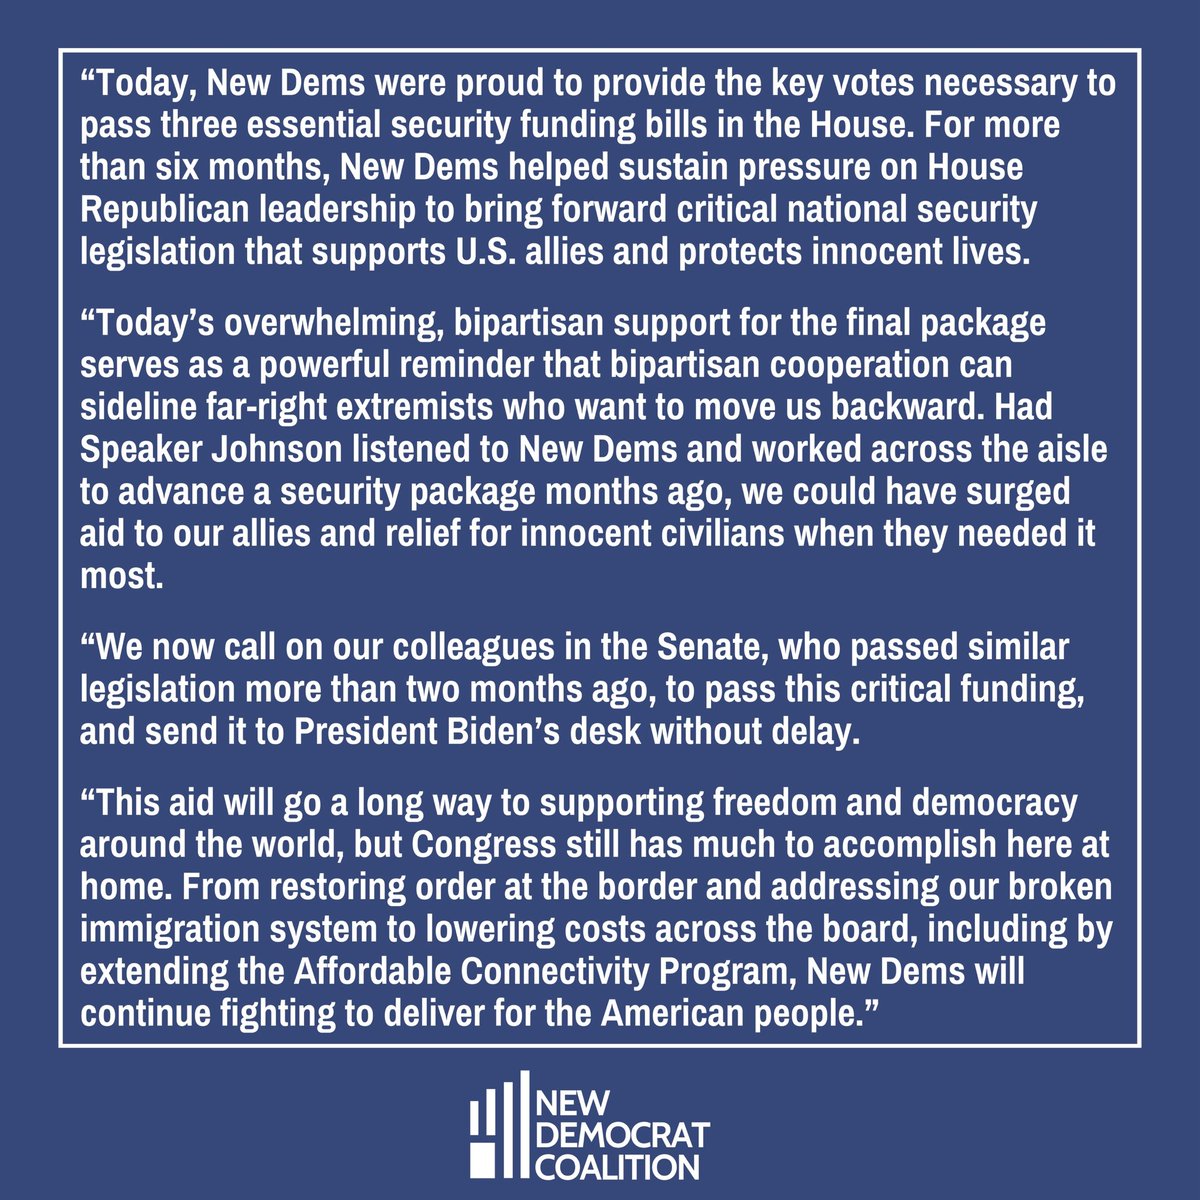 Today, New Dems were proud to provide key votes necessary to pass three essential security funding bills. Although today's success could have, and should have been achieved months ago, we are grateful that the legislation is finally moving forward. Full statement ⬇️